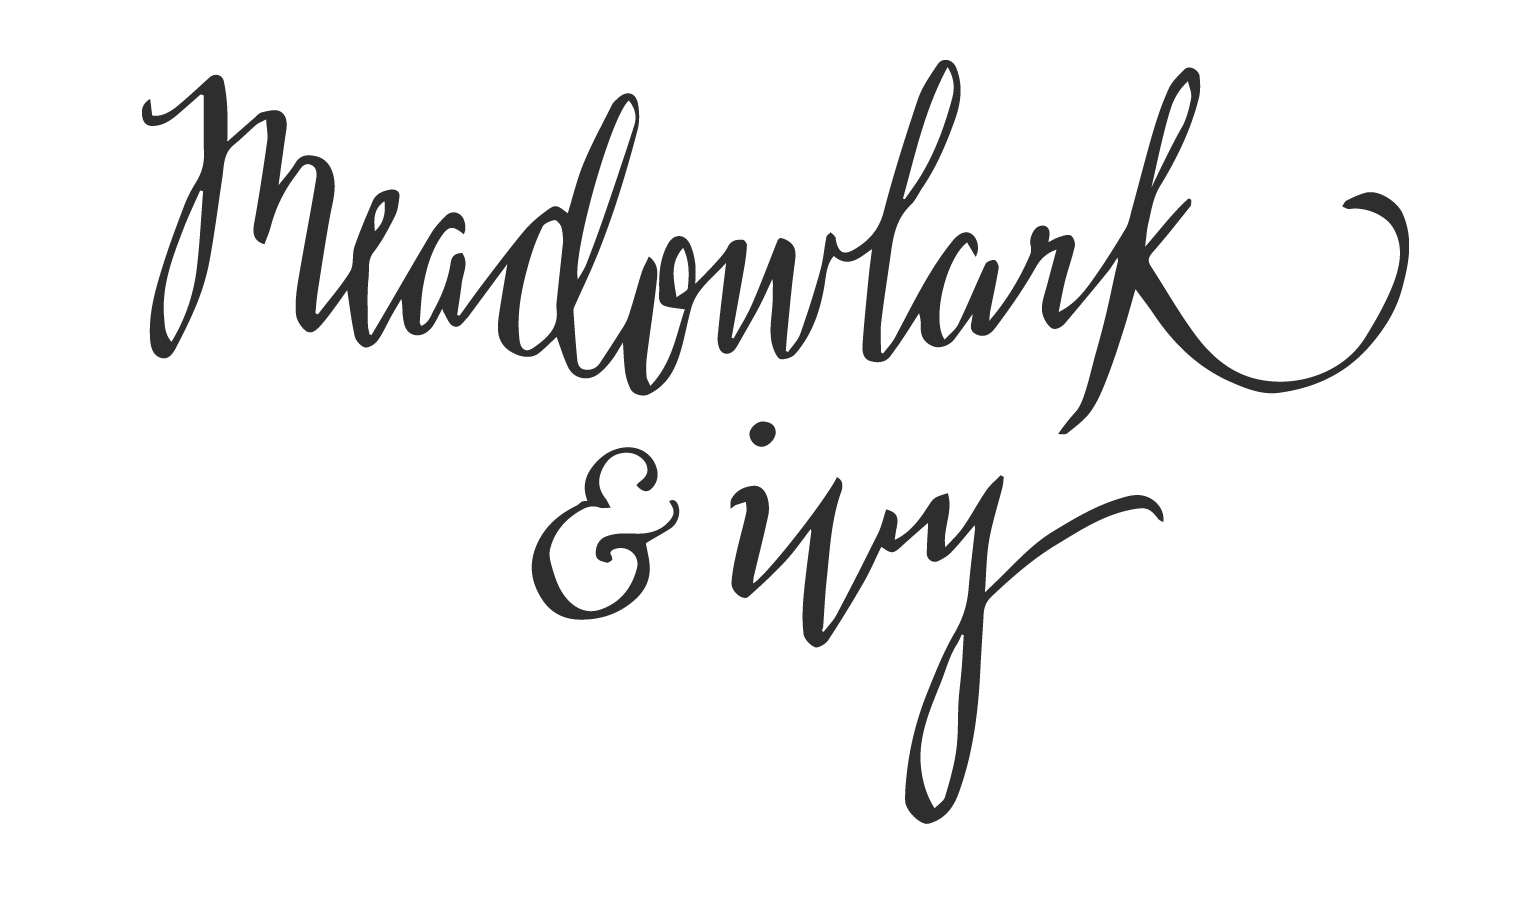 Meadowlark and Ivy